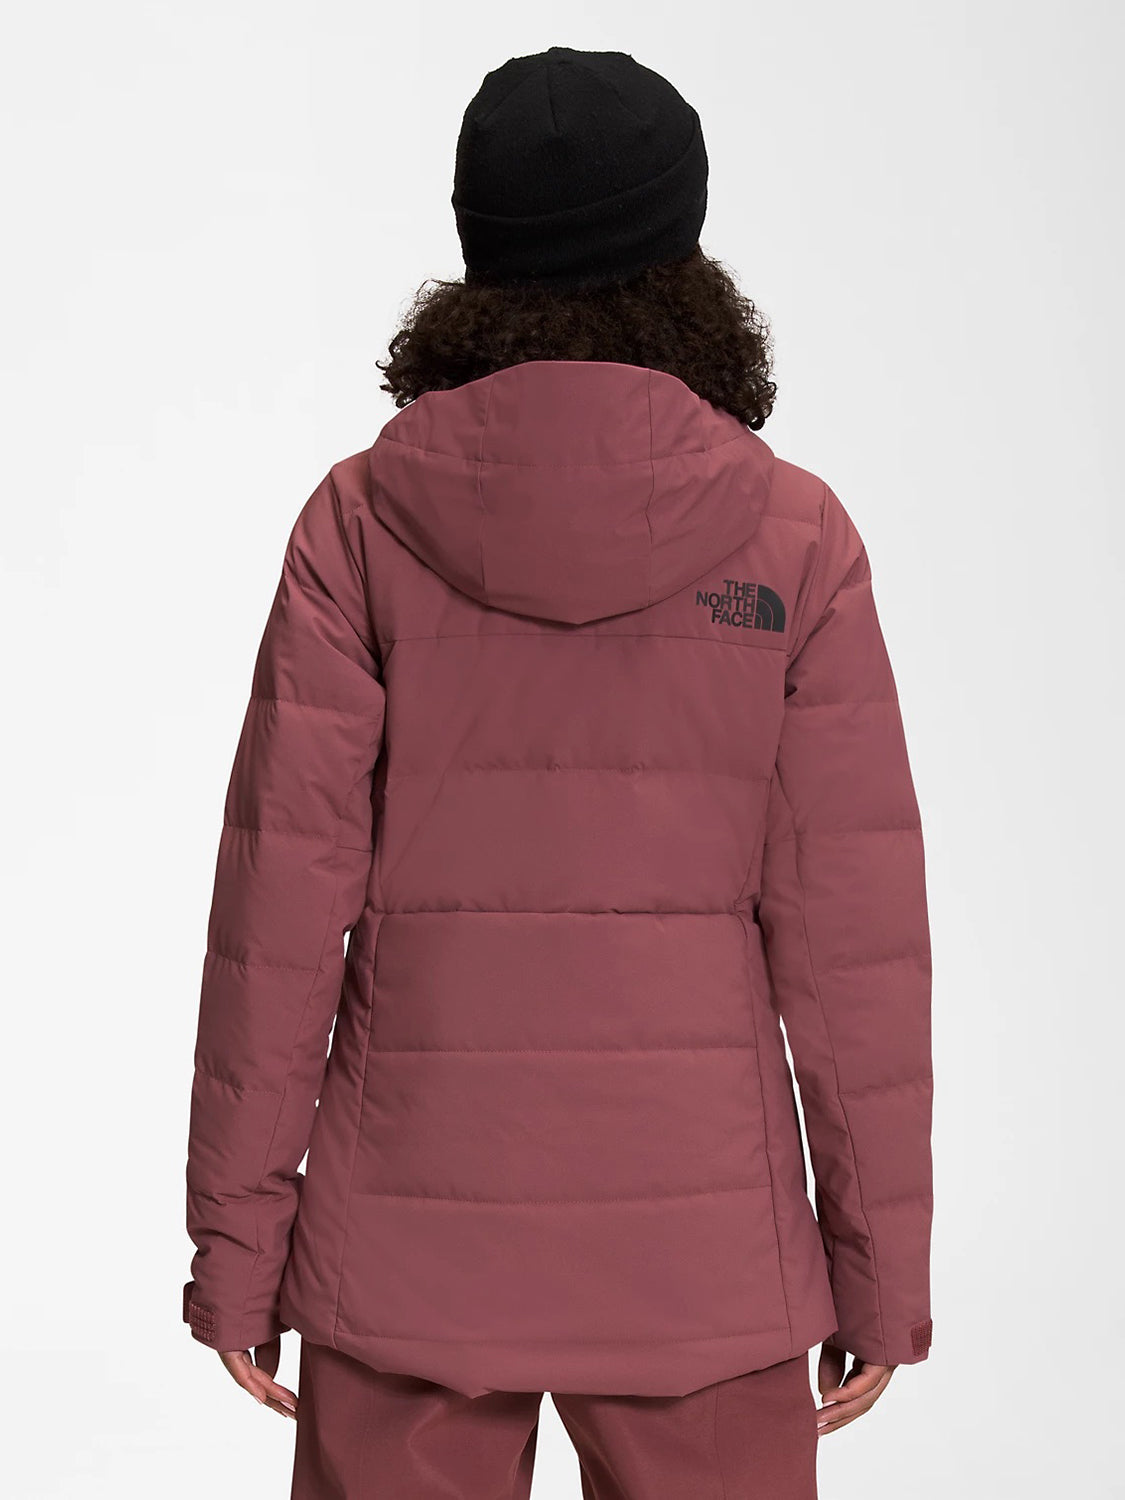 The North Face Womens COREFIRE DOWN Jacket